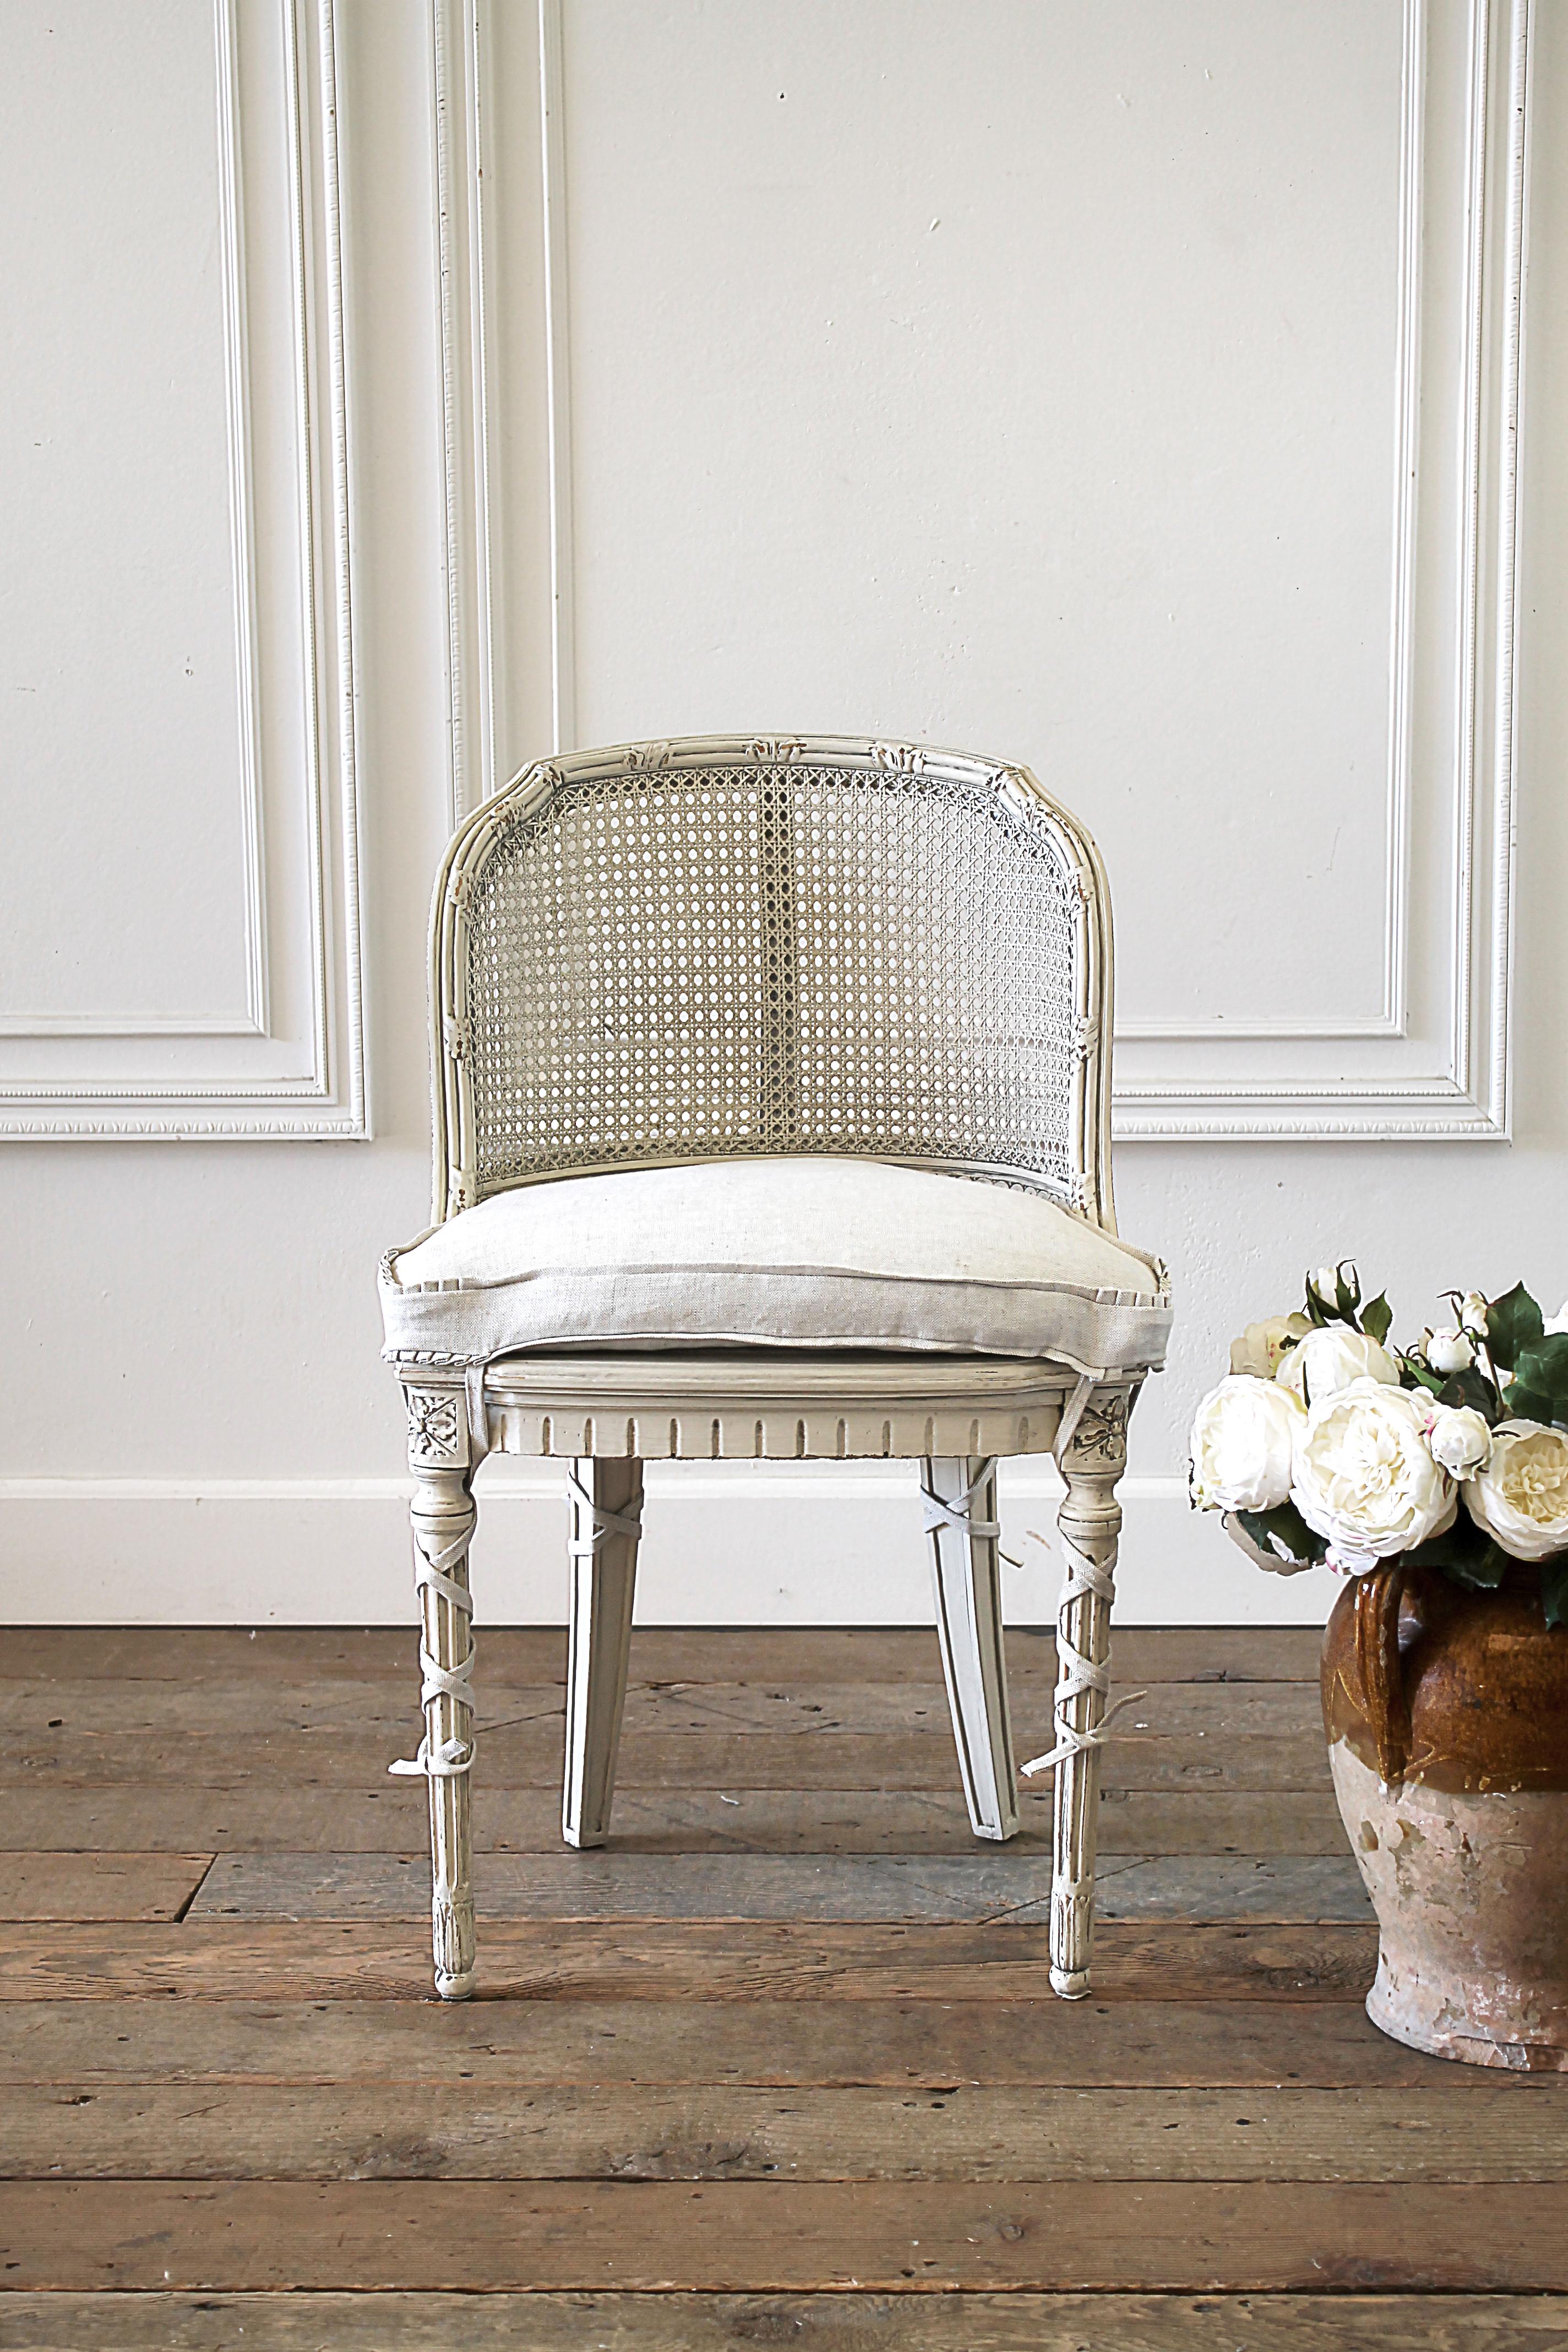 French Country cane back vanity chair
Painted and upholstered Louis XVI style vanity chair in natural linen. Painted in our soft oyster white, with subtle distressed edges, and finished with an antique glazed patina. This off white color blends